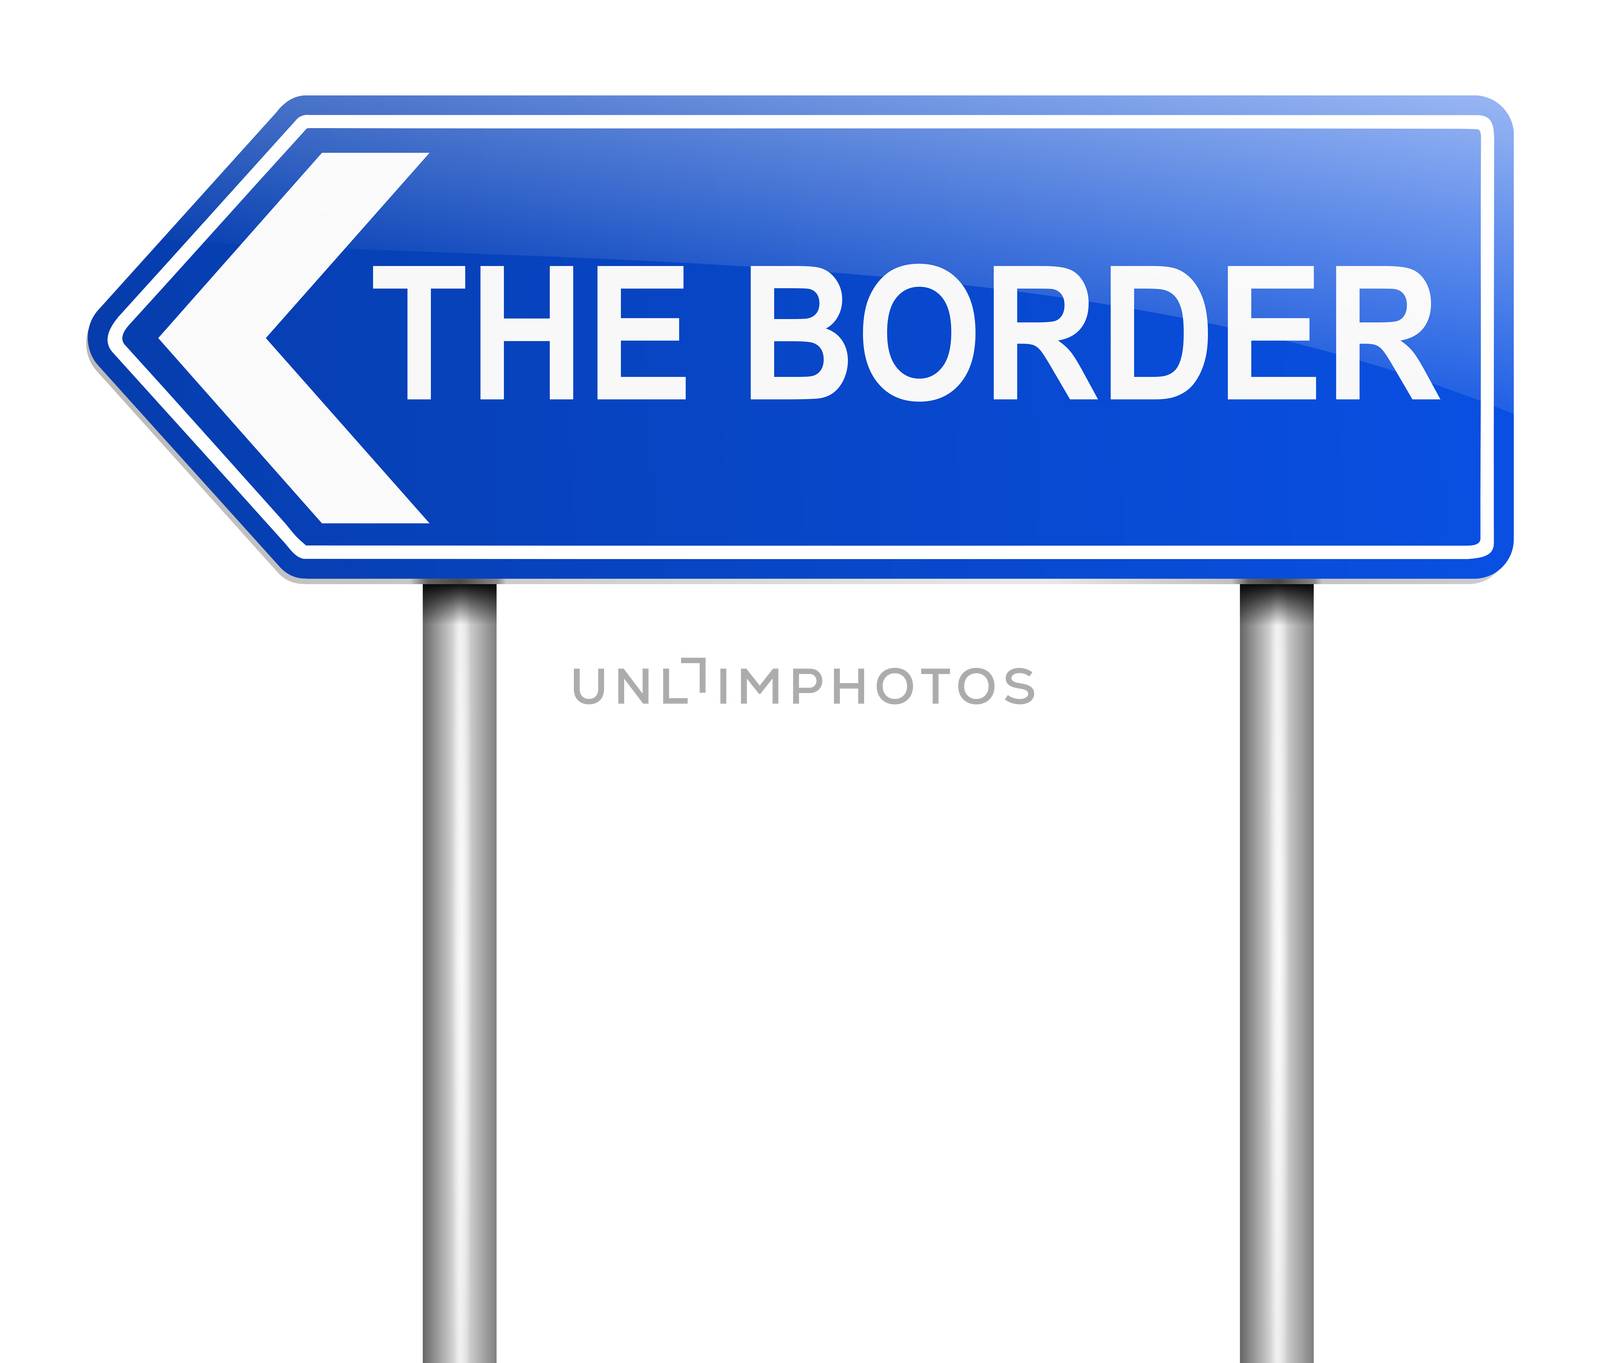 Illustration depicting a sign with a border concept.